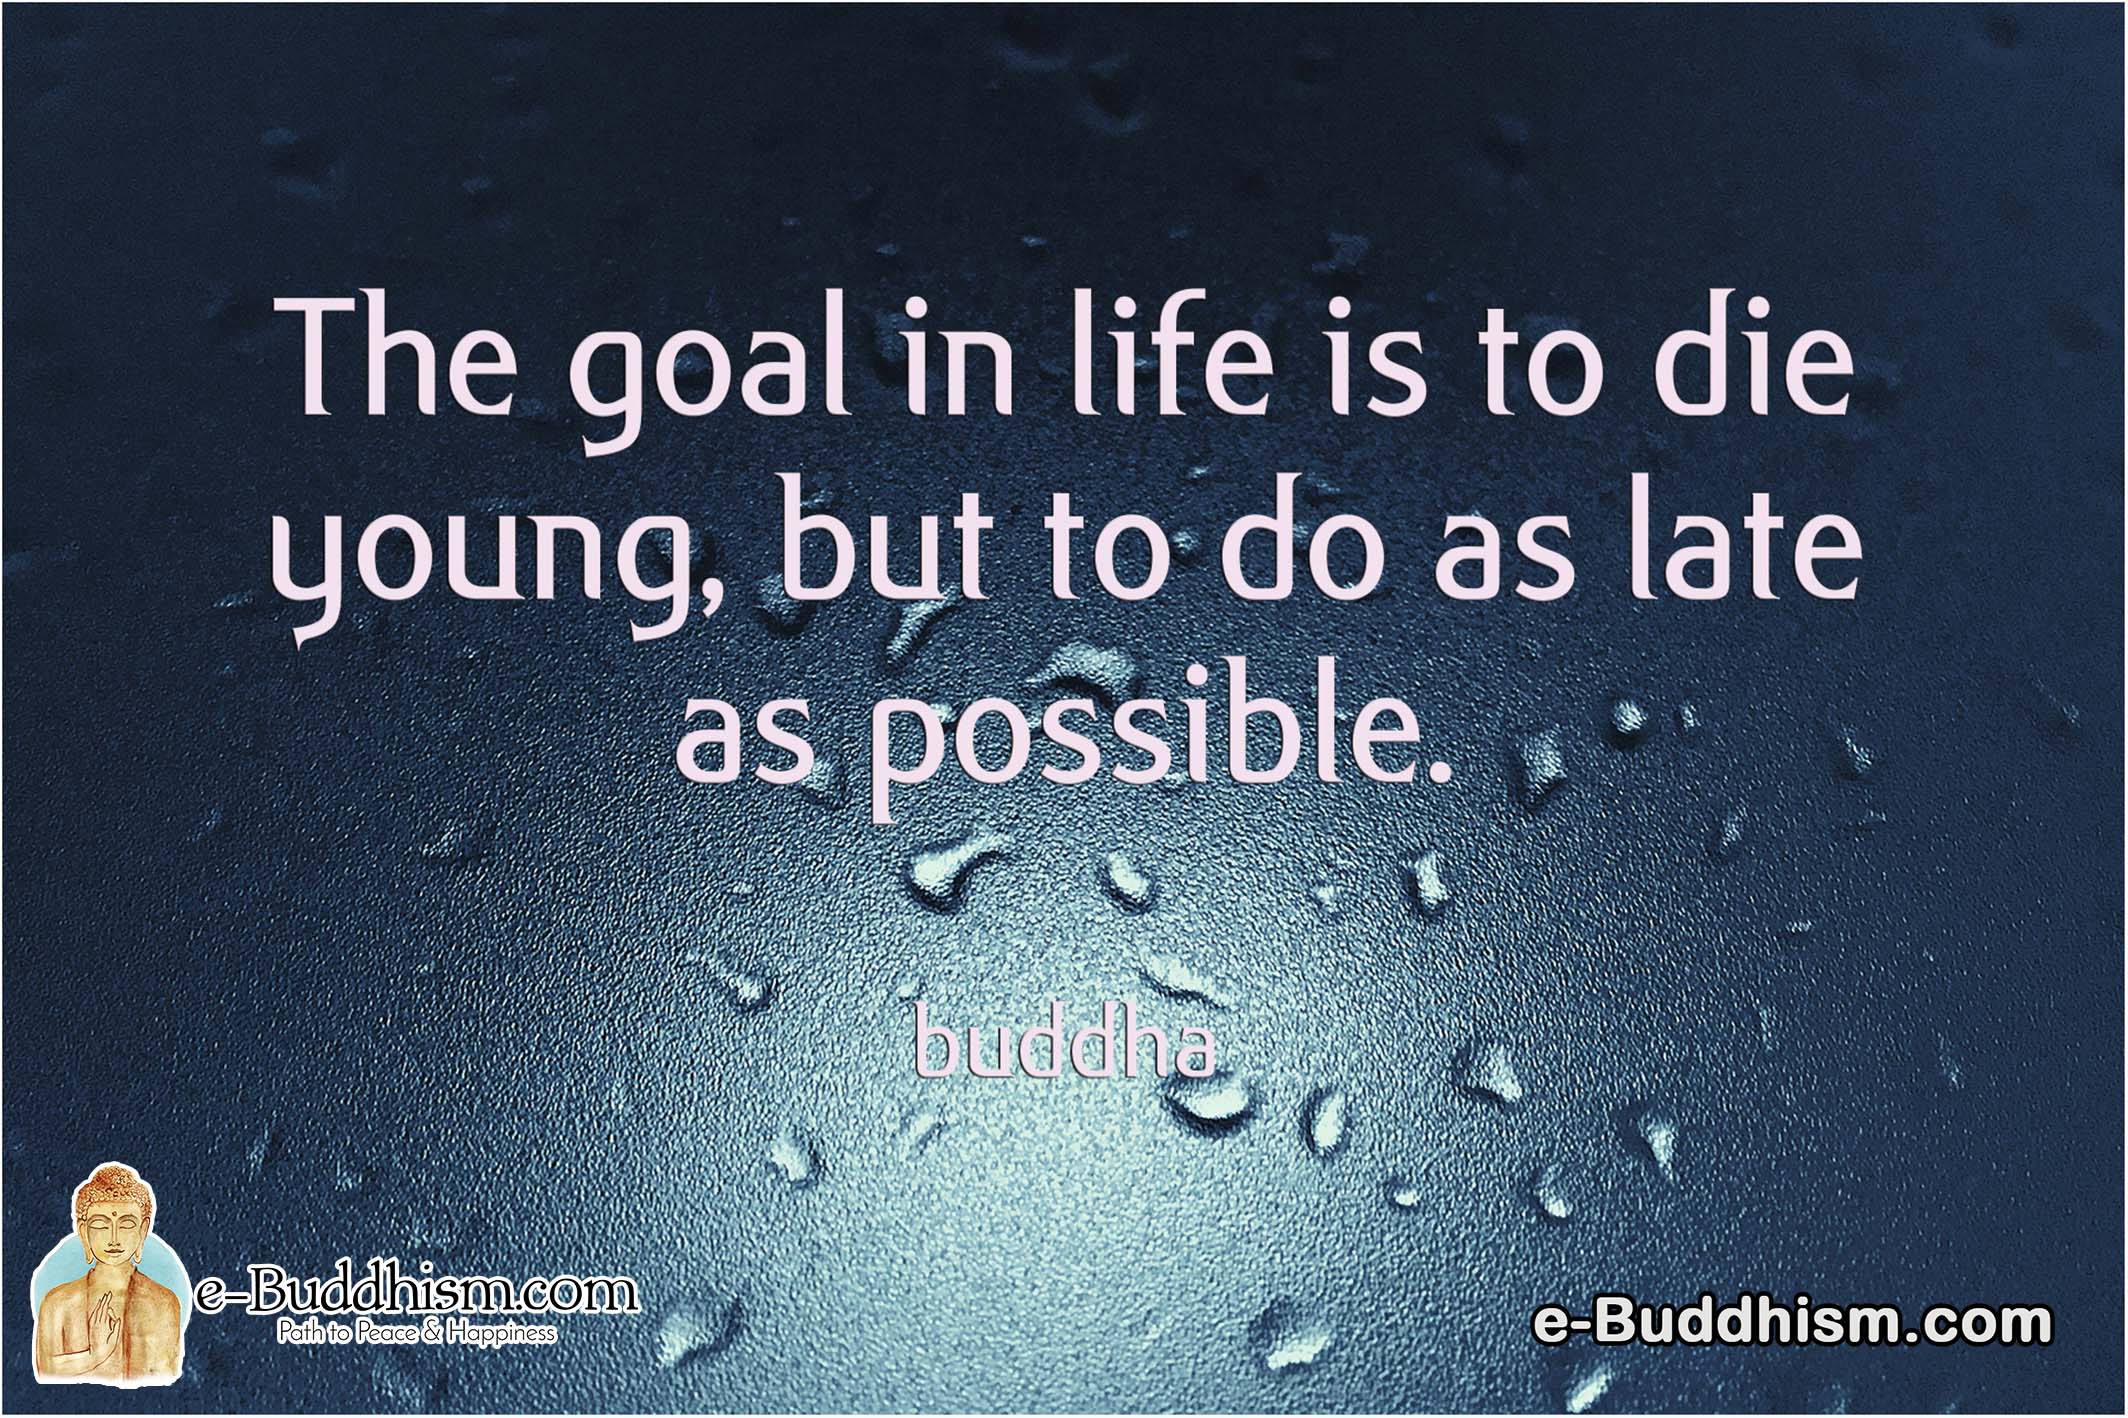 The goal in life is to die young but to do it as late as possible. -Buddha